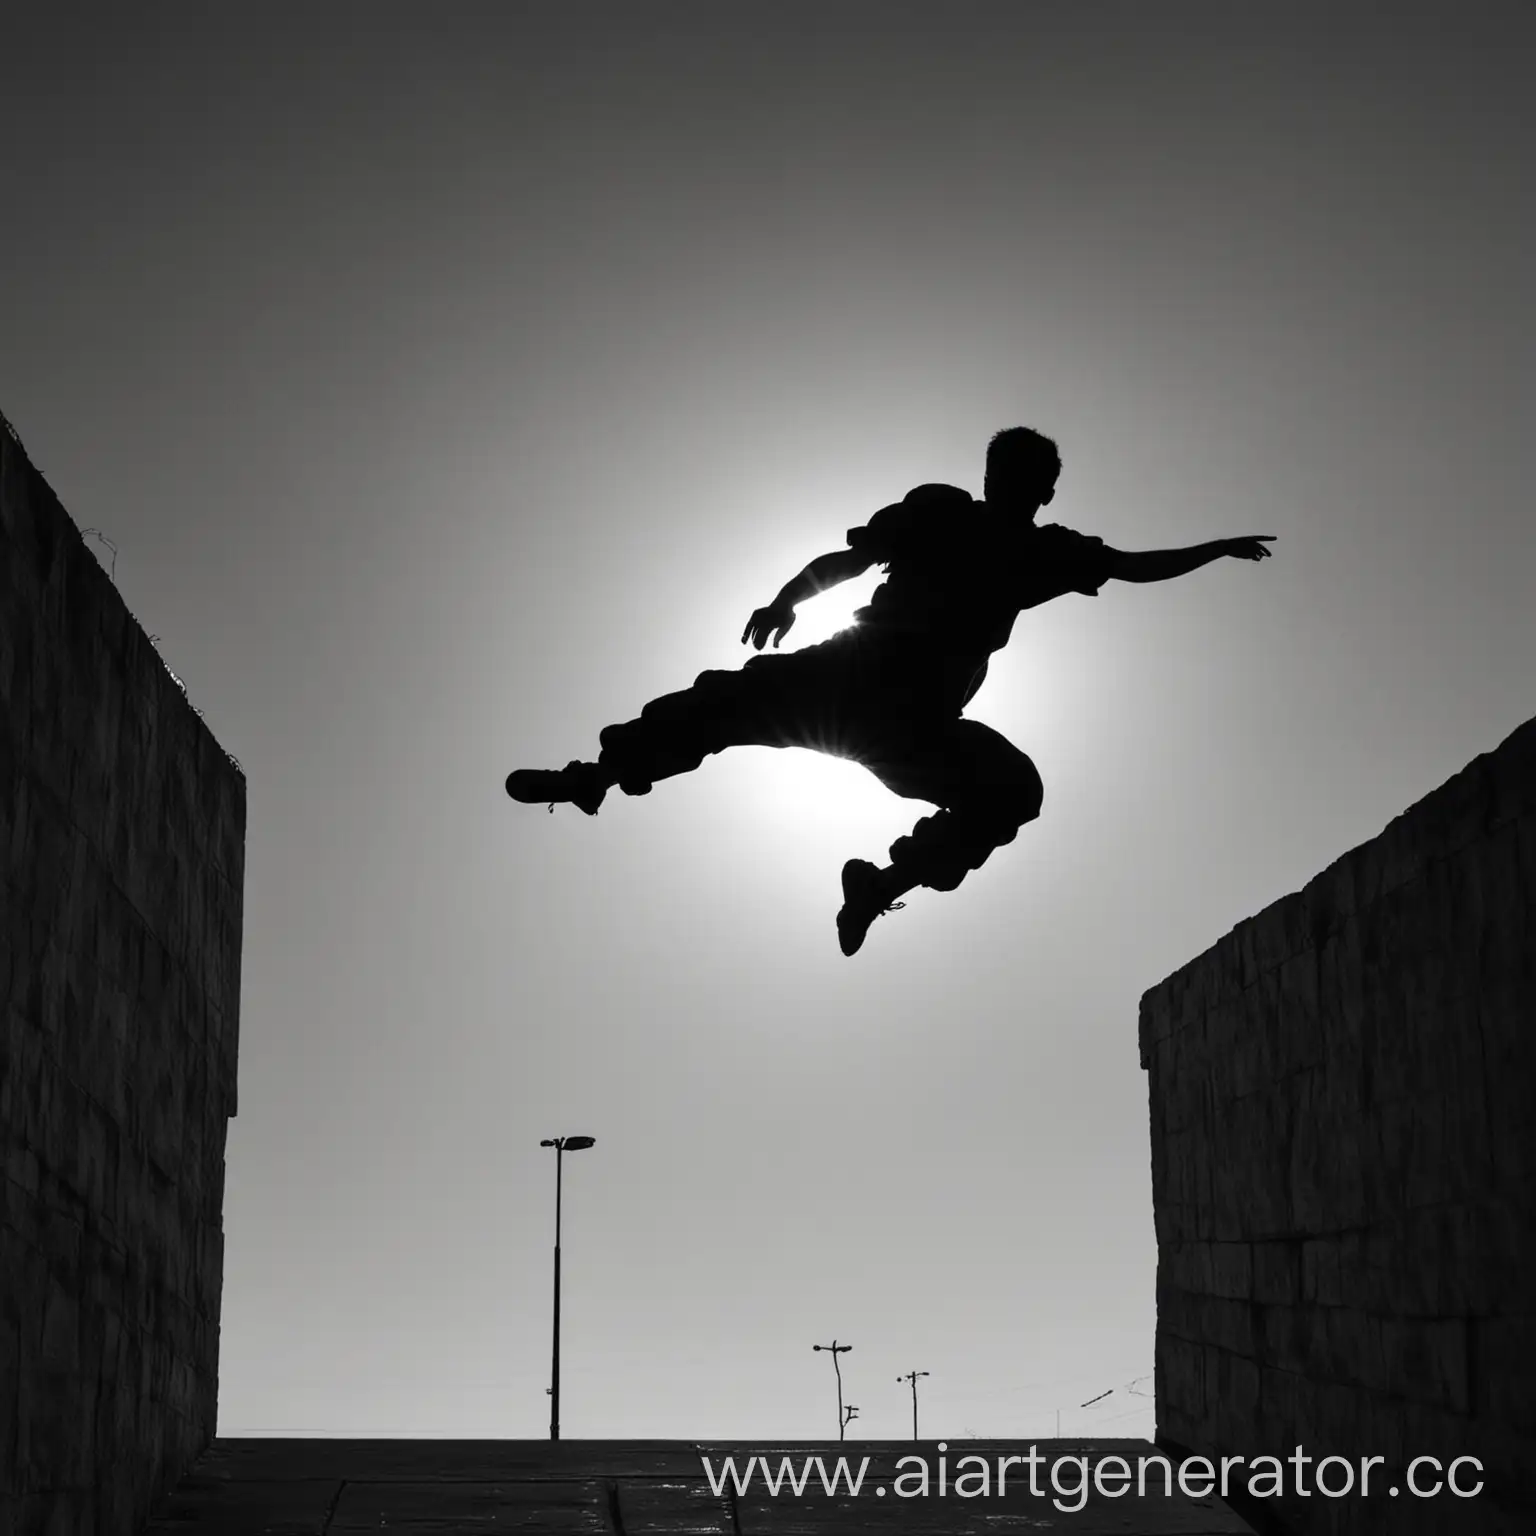 Dynamic-Parkour-Silhouette-in-Urban-Environment